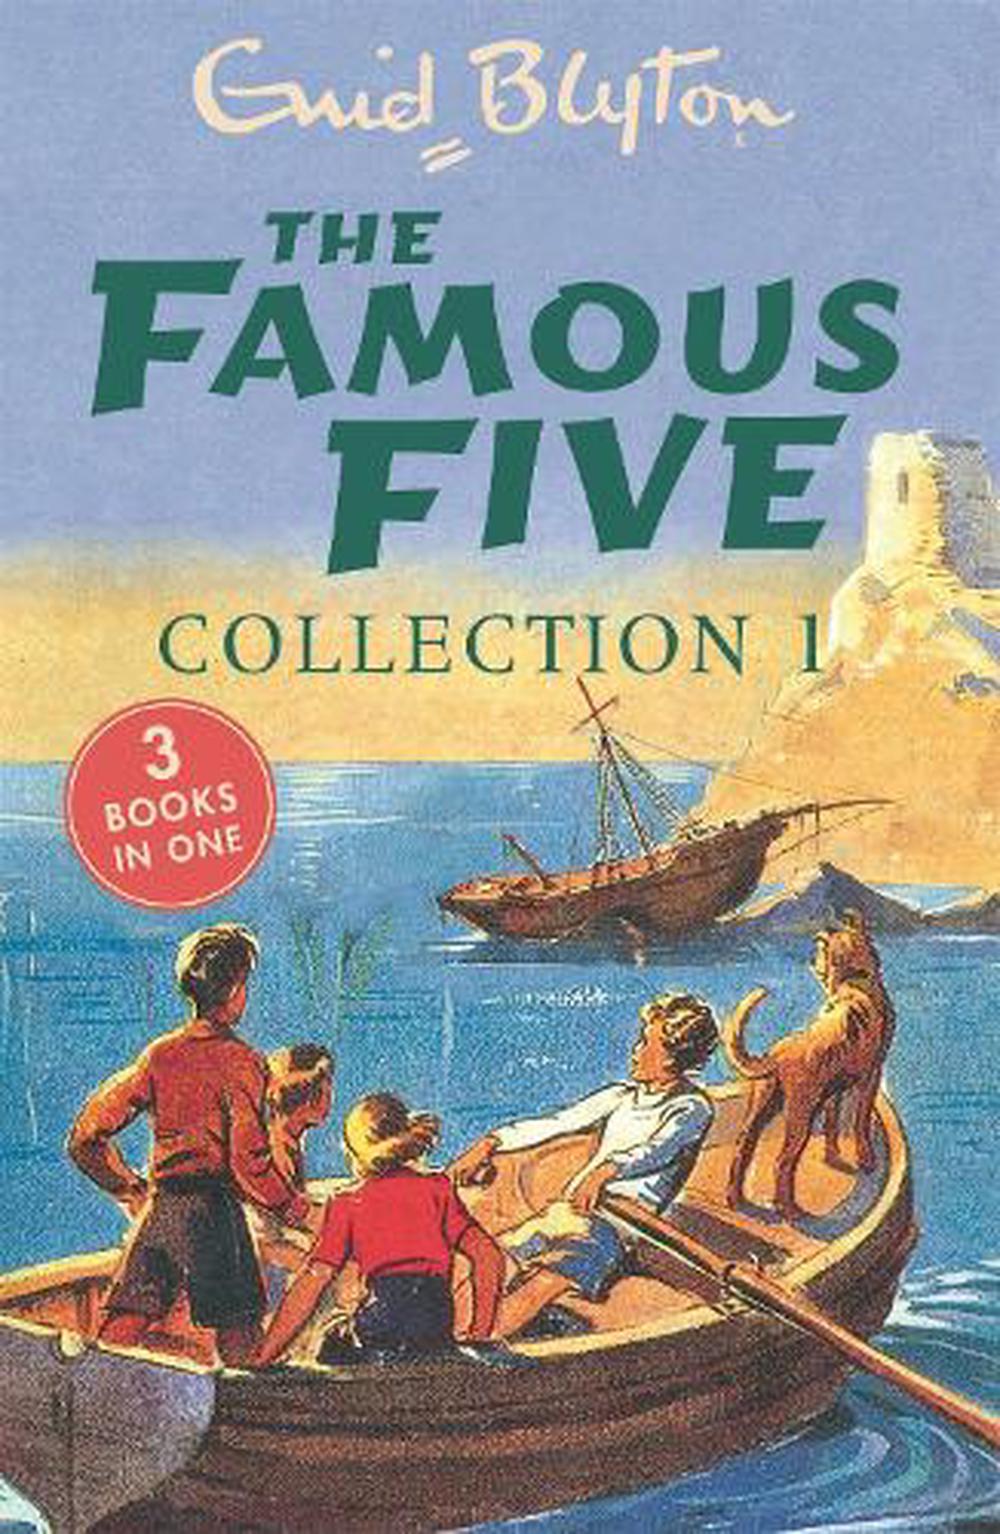 The Famous Five [4 Adventures] by Enid Blyton